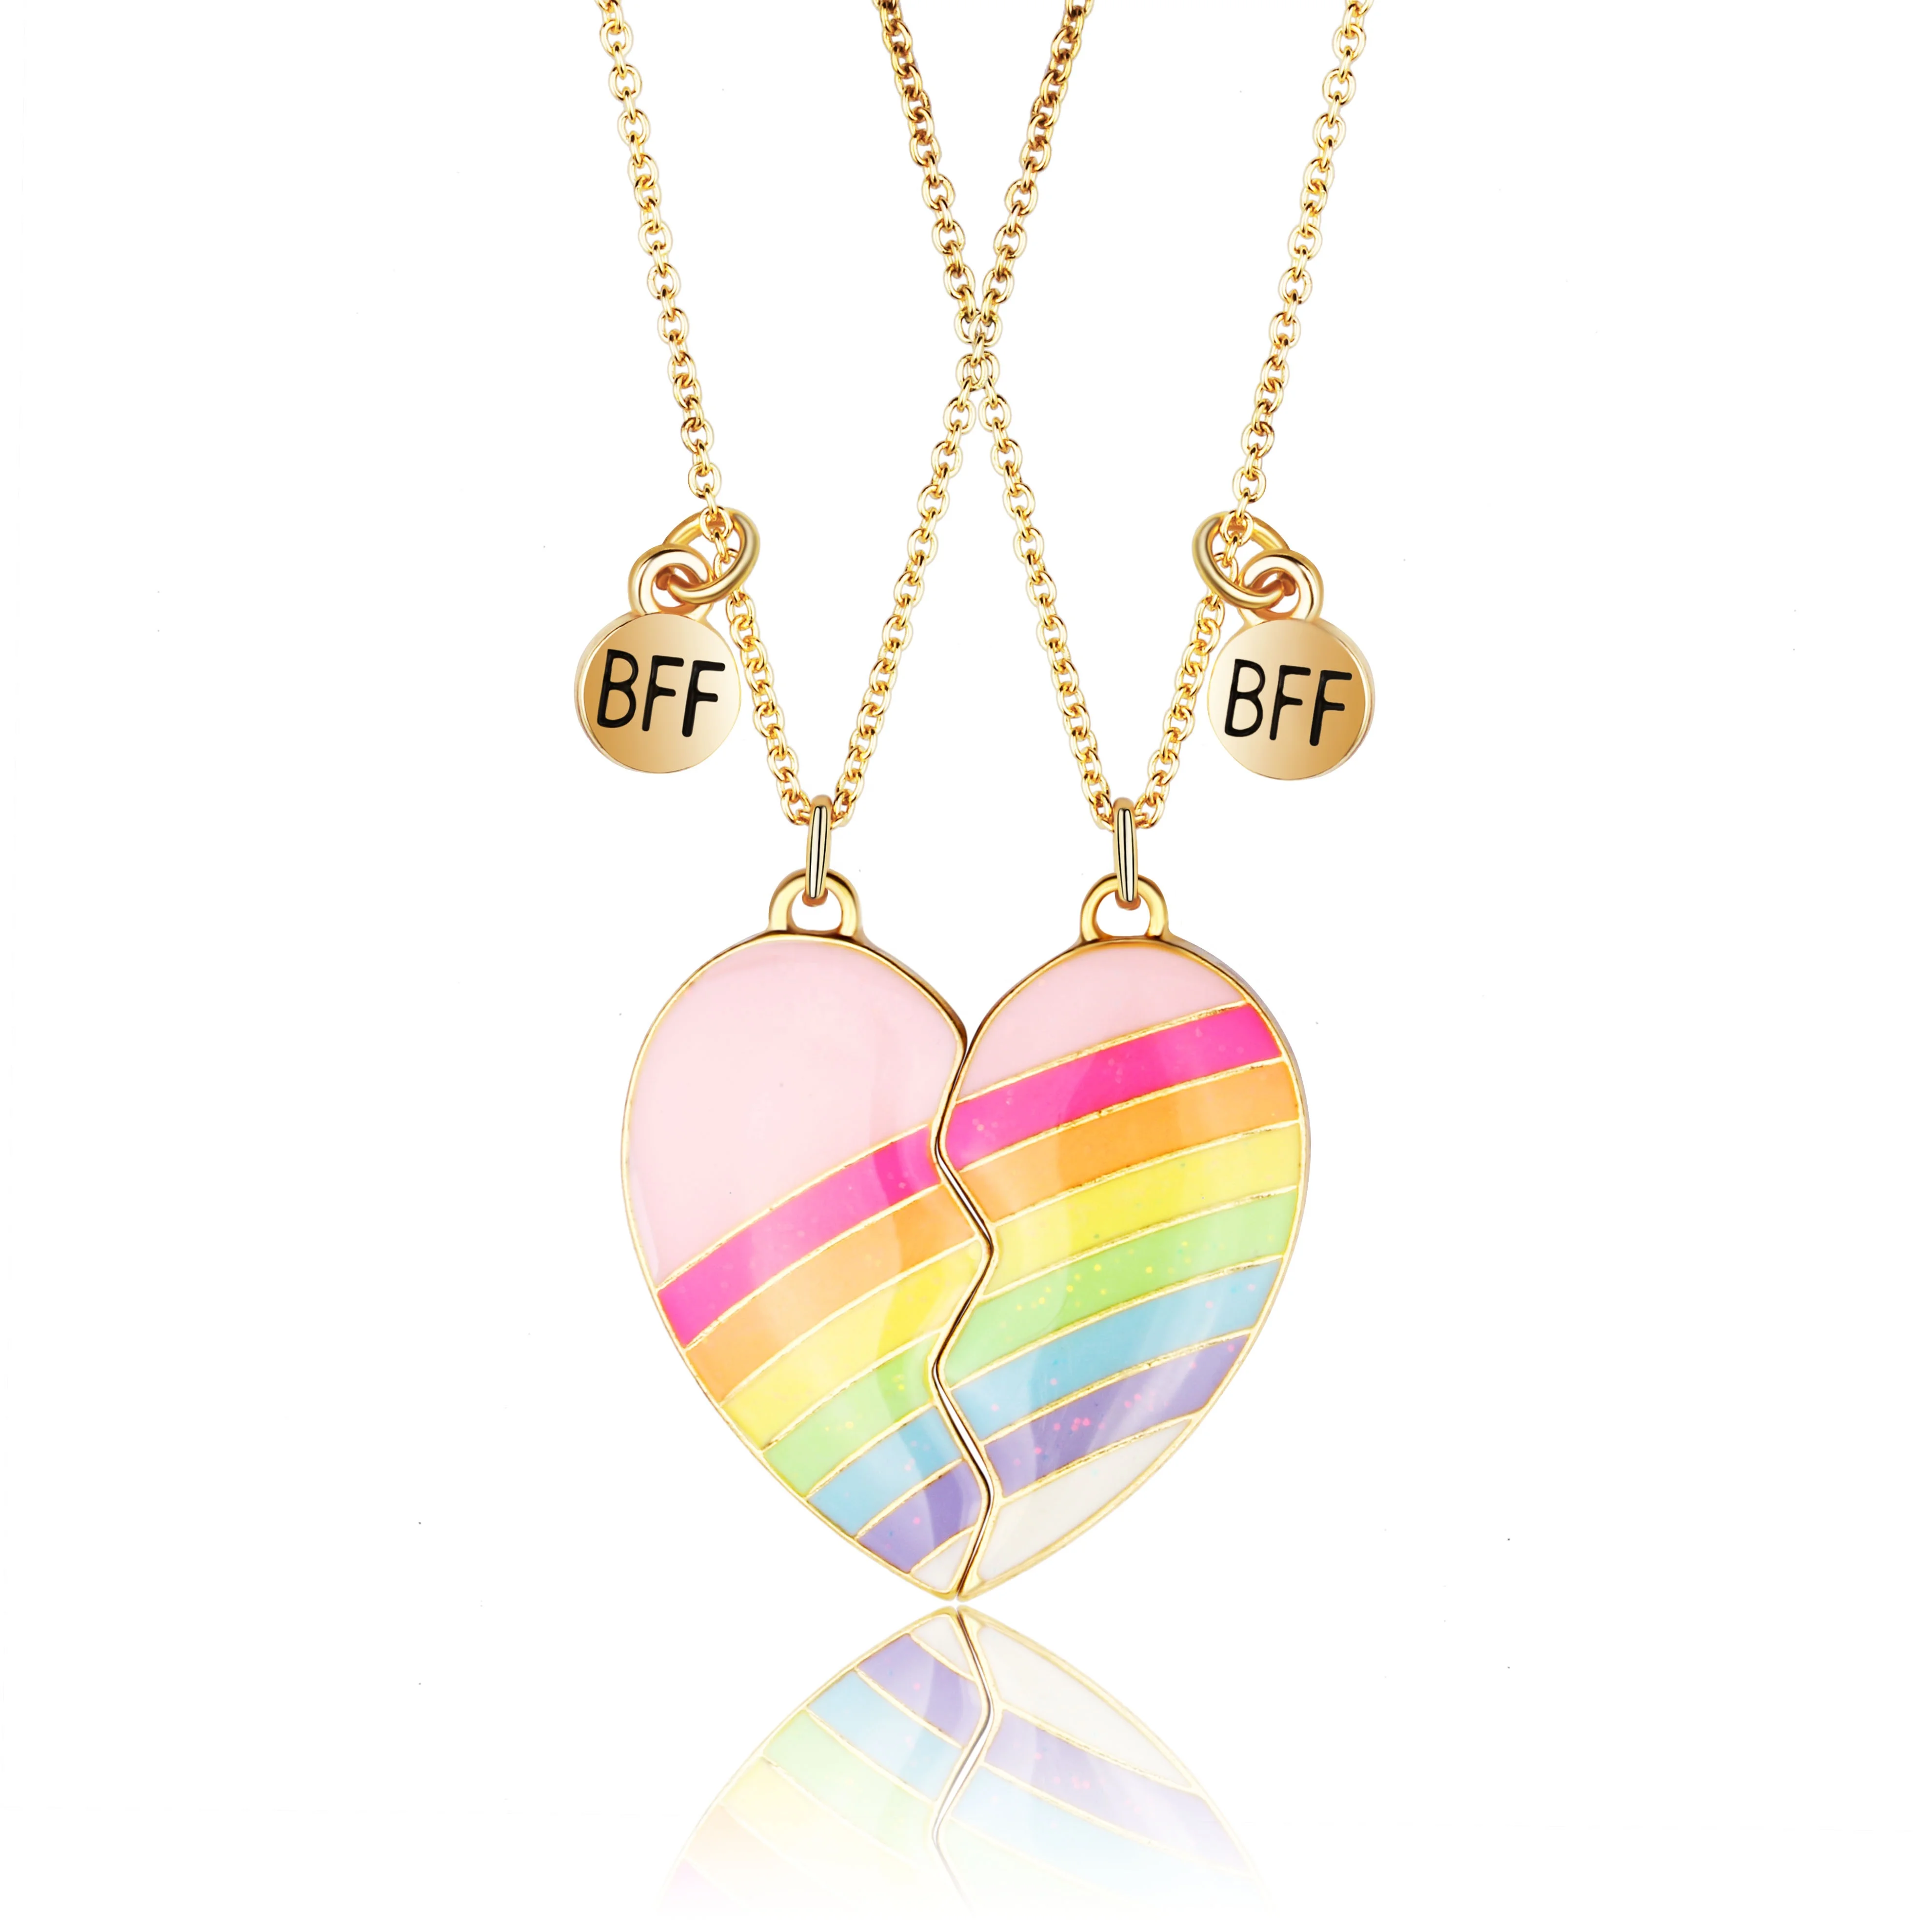 Buy El Regalo Valentines Day Gift - 2 Pcs Heart Couples Magnetic Necklace  for Couples/Besties/Friends - Matching Pendant Friendship Distance Magnetic  Love Heart Jewelry (Golden & Silver Hearts) at Amazon.in